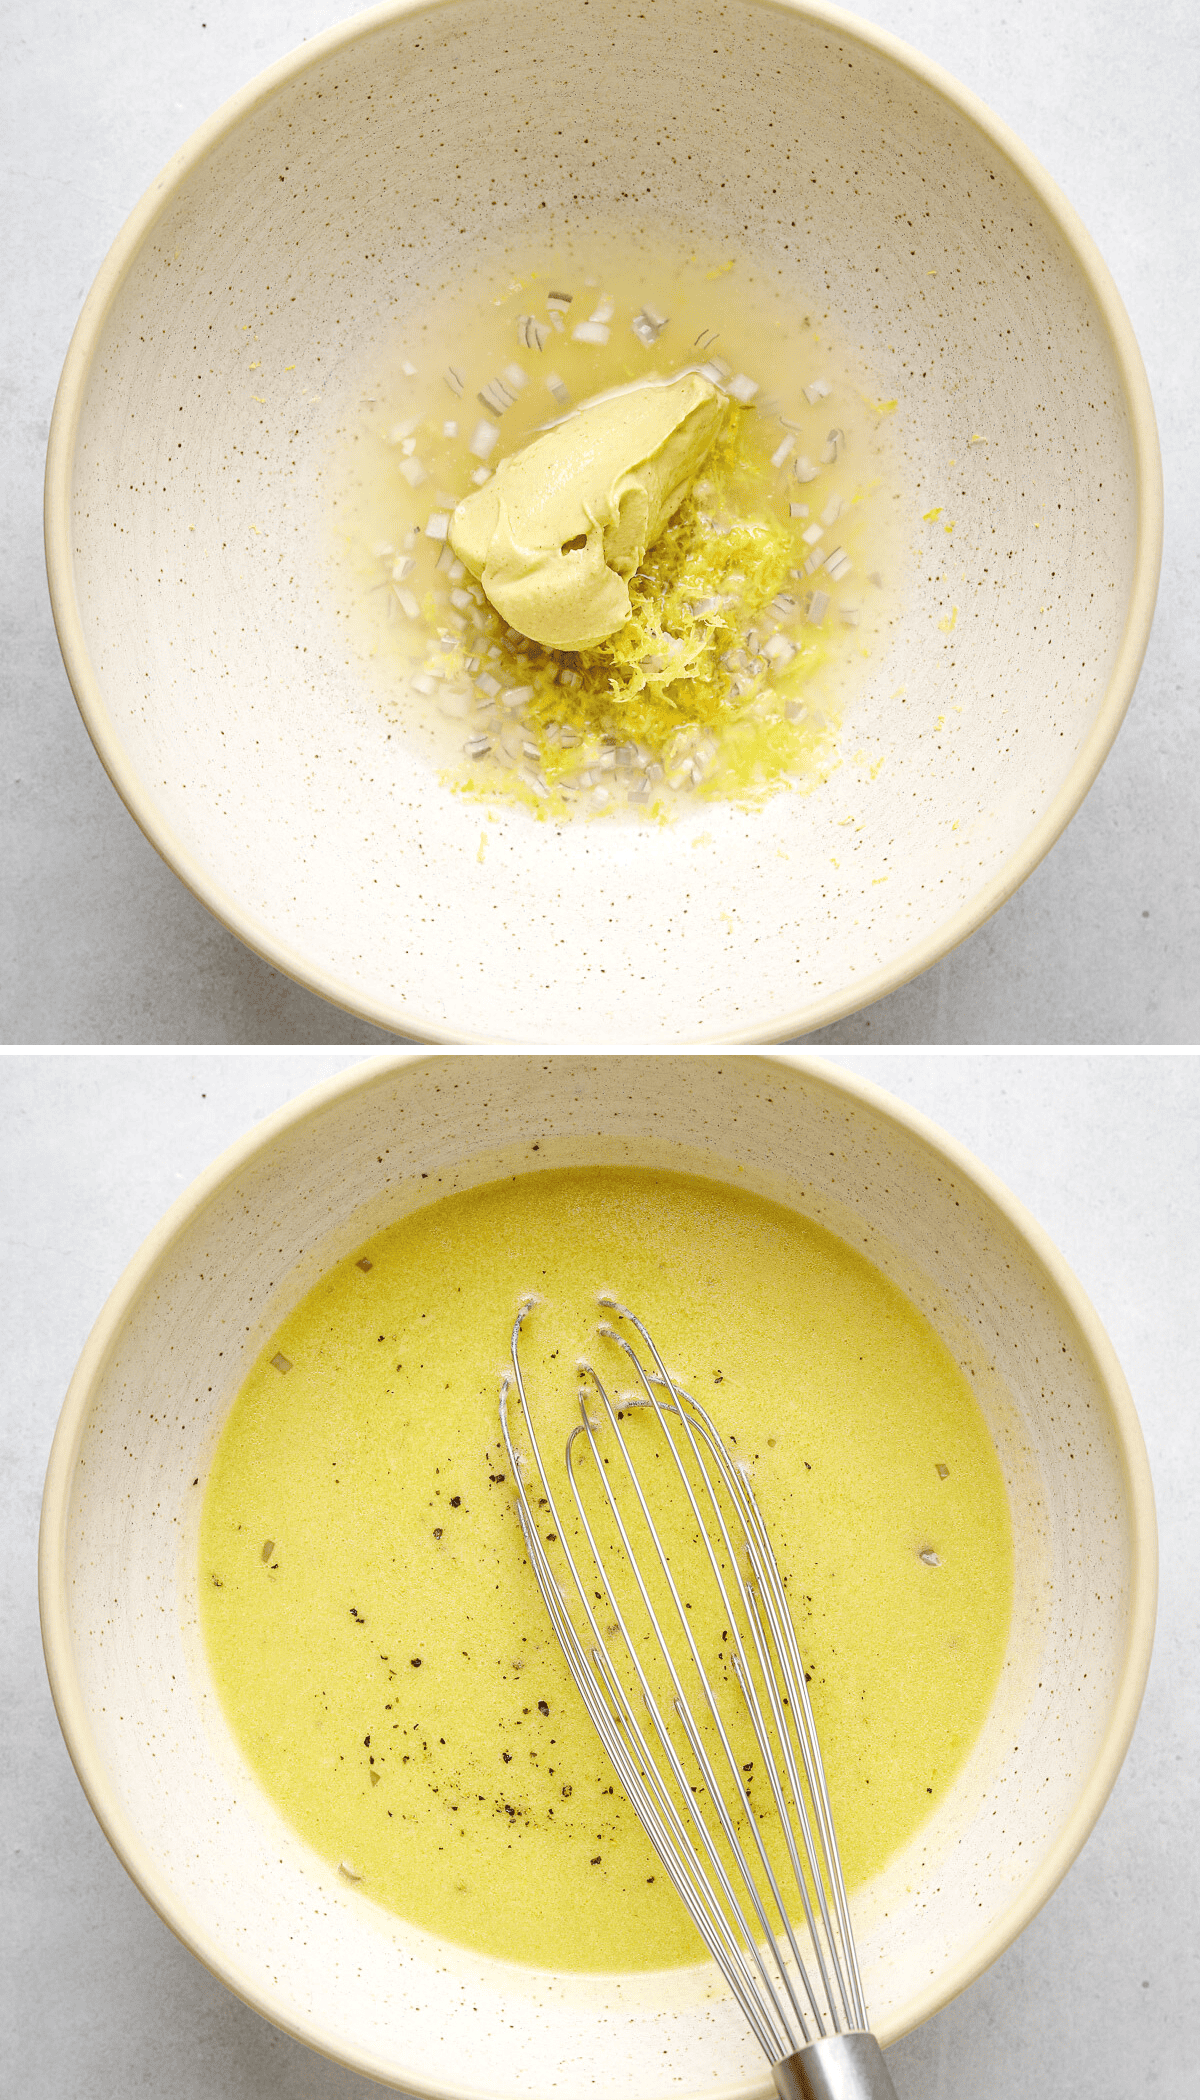 Top: a bowl with mustard, lemon zest and shallots. Bottom: salad dressing being whisked together in a white bowl.